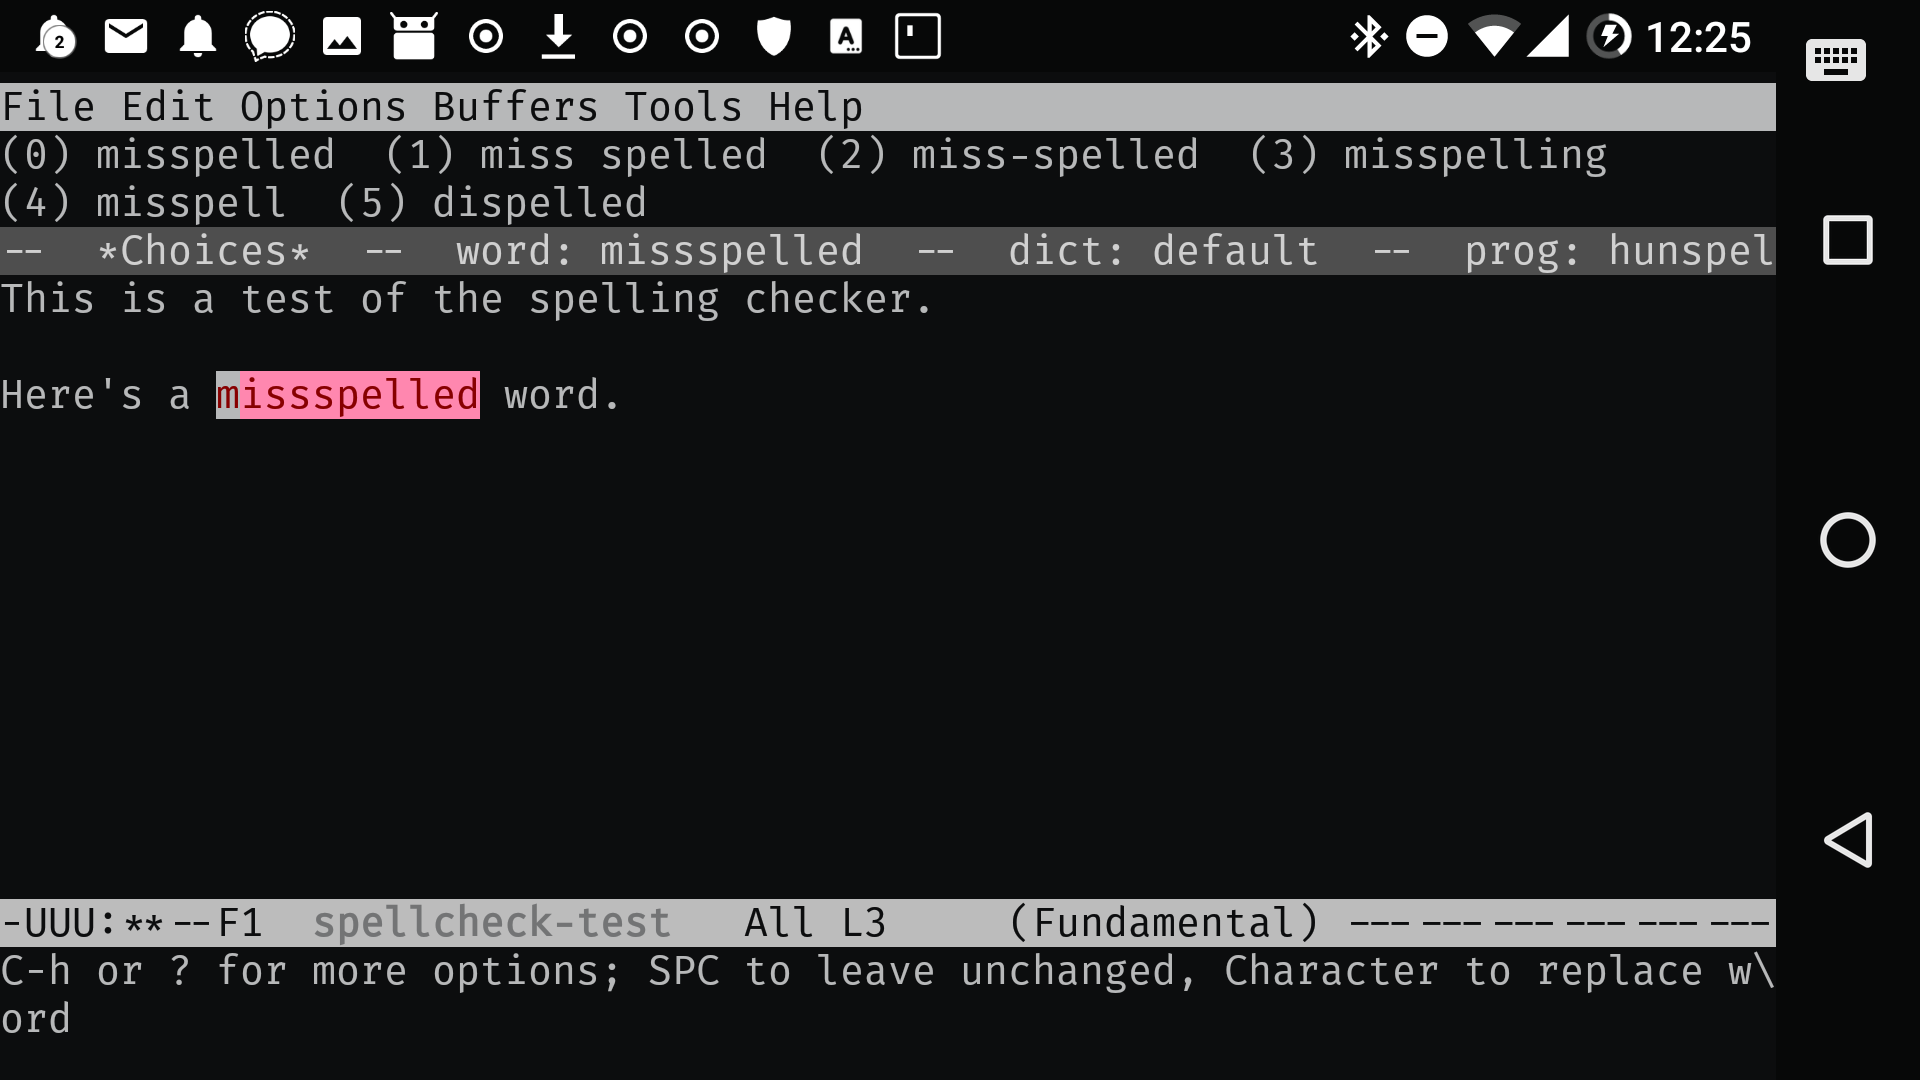 Emacs under Termux running a spell check on my document using hunspell.